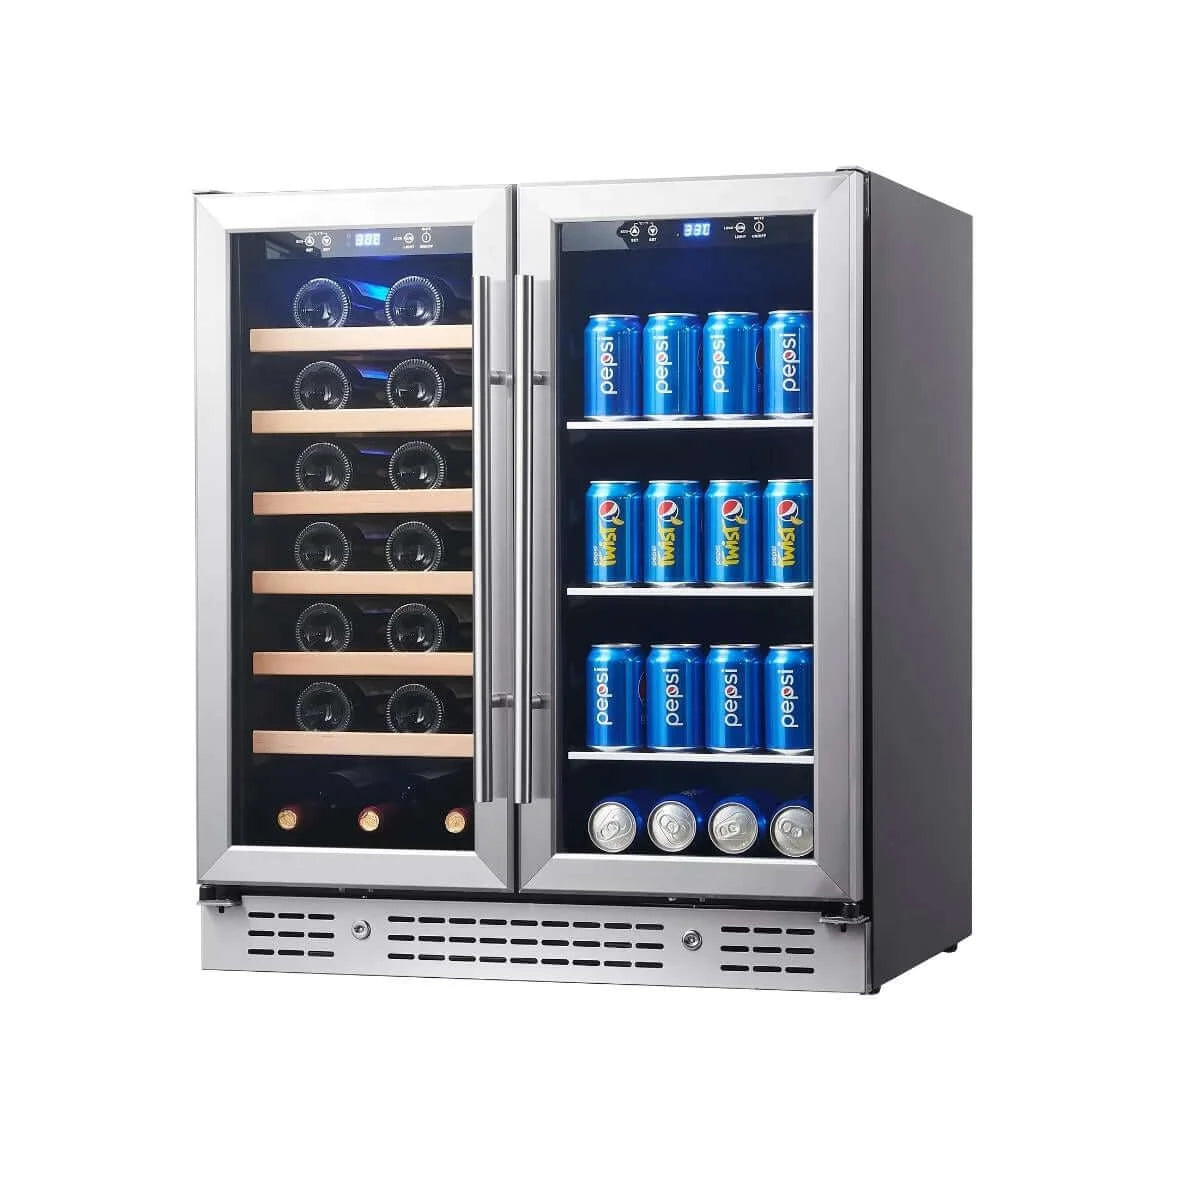 KingsBottle 30" Combination Beer and Wine Cooler with Low-E Glass Door - Stainless Steel Trim